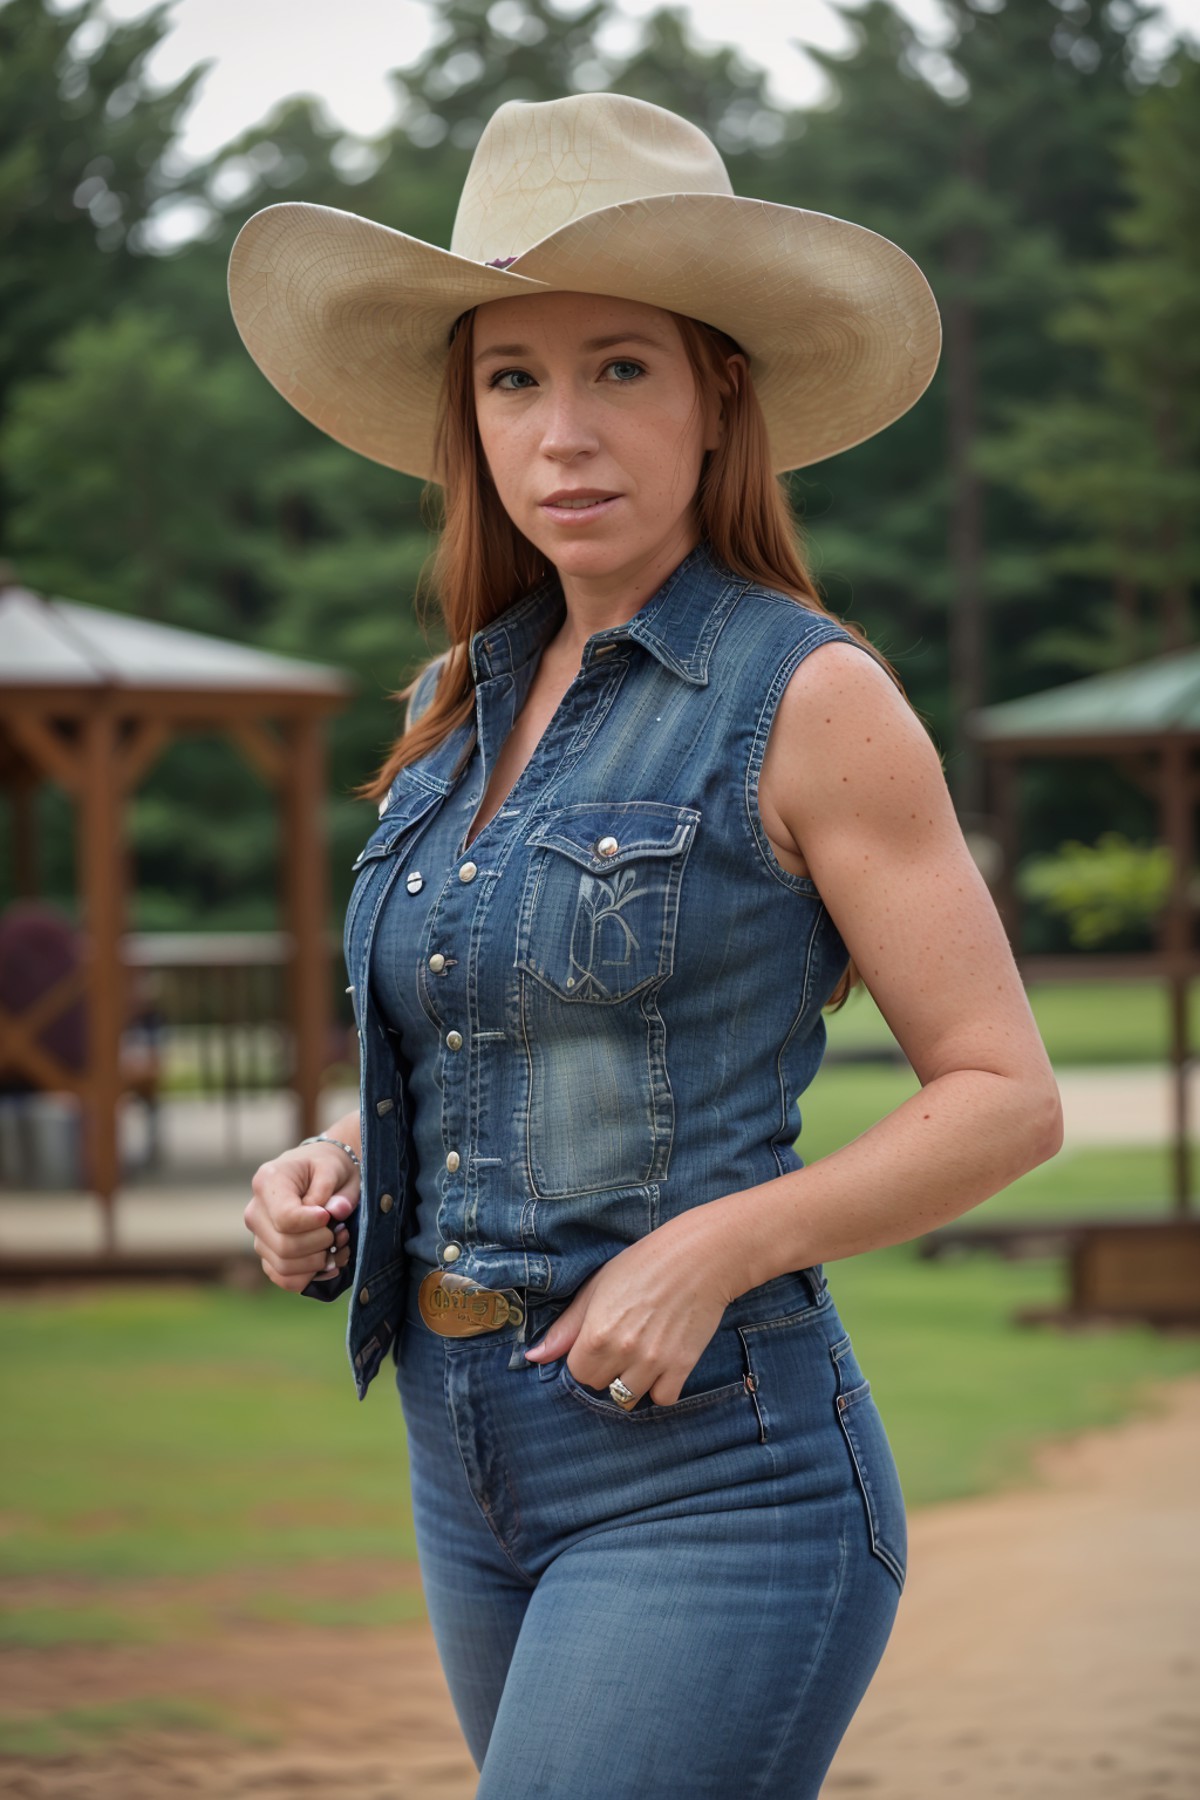 (GS-Womanly:0.5) chucknorris, long ginger hair under hat dressed as a texas ranger jeans boots hat shirt vest outdoors
(ma...